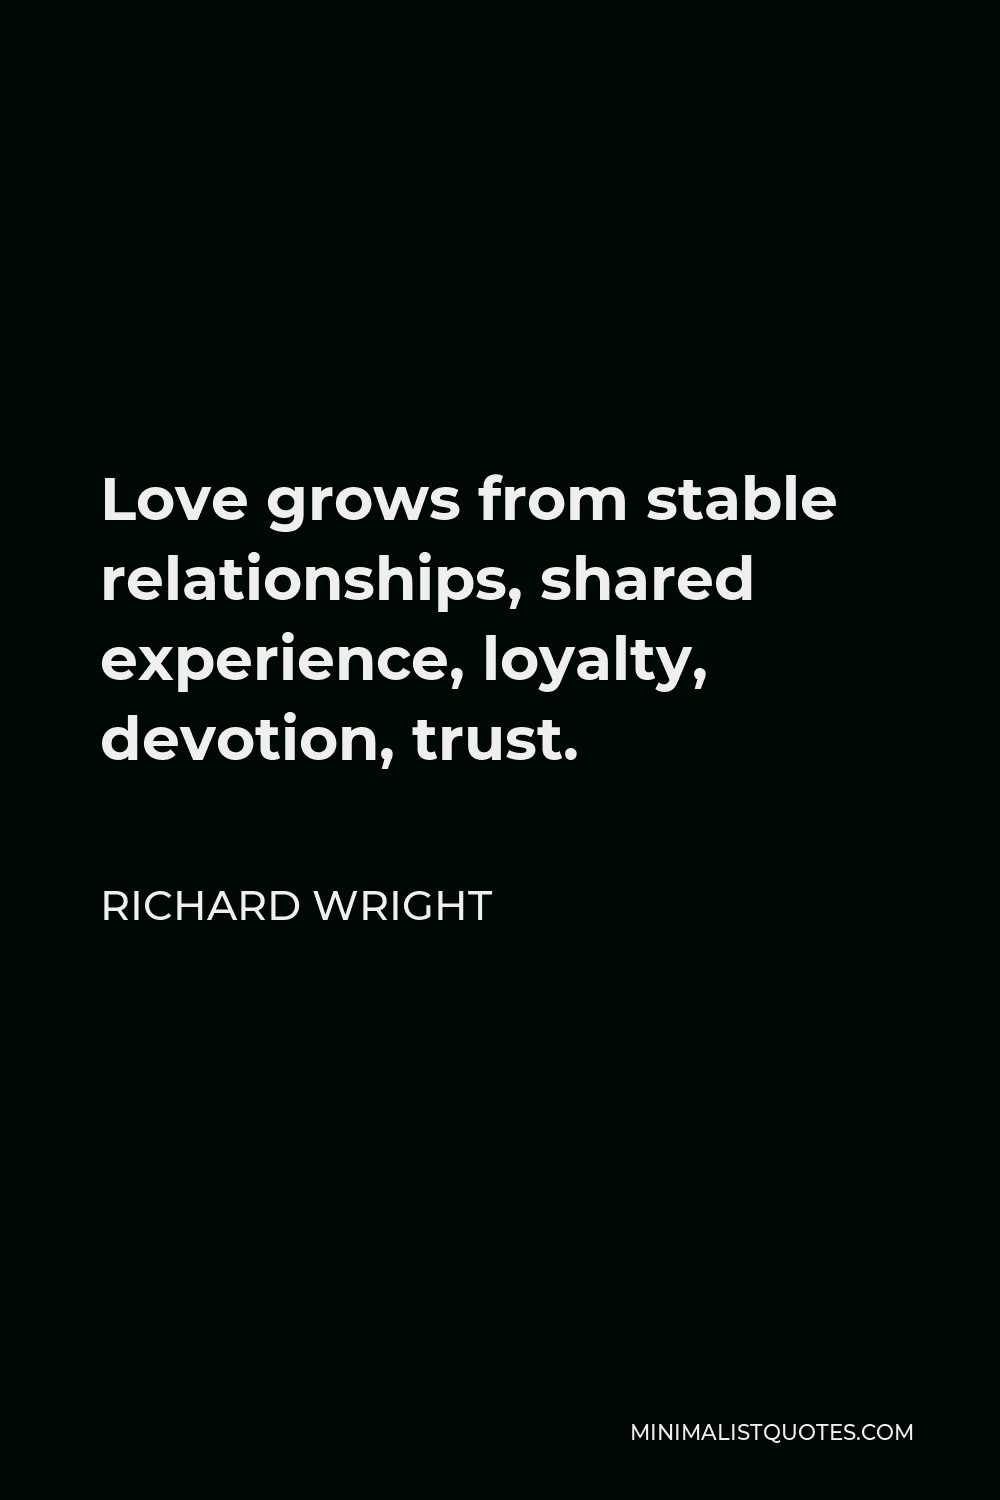 Richard Wright Quote - Love grows from stable relationships, shared experience, loyalty, devotion, trust.